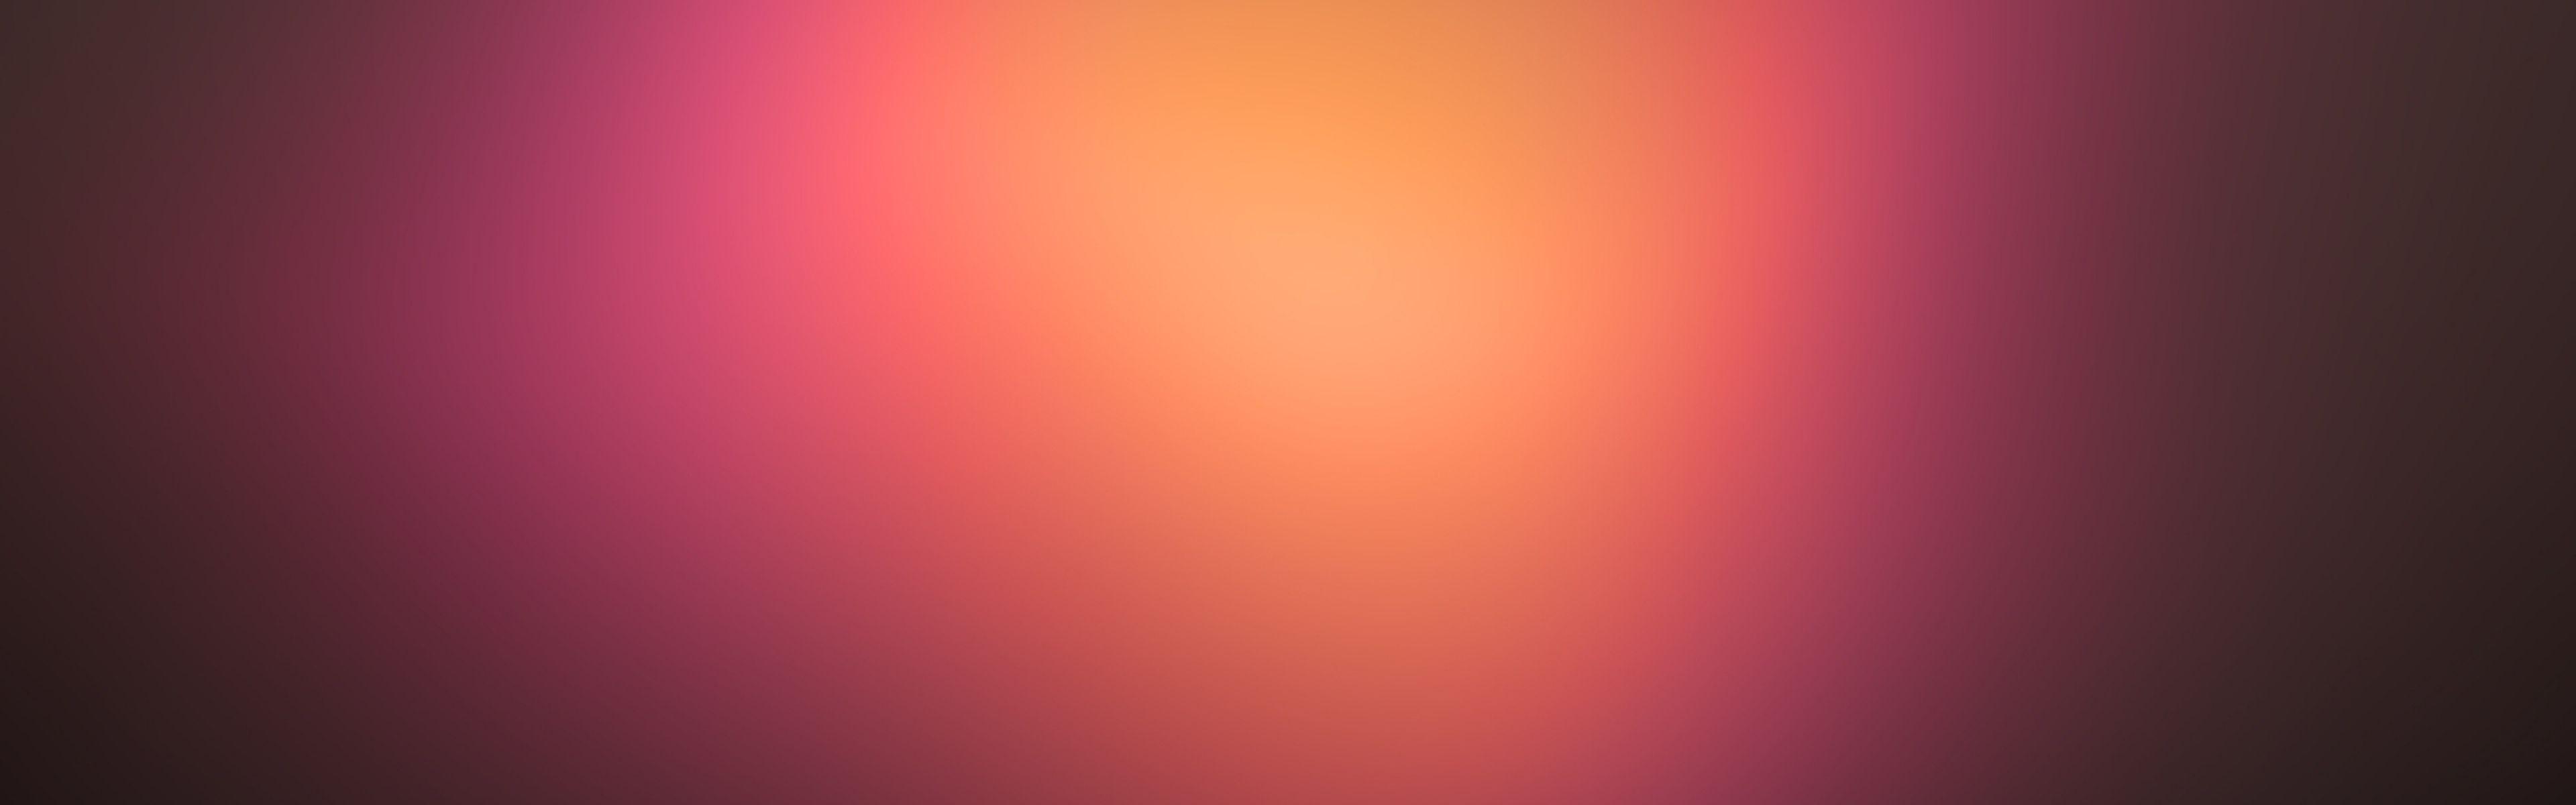 Gallery For: Blur Wide Wallpaper, HQ Blur Wide Background